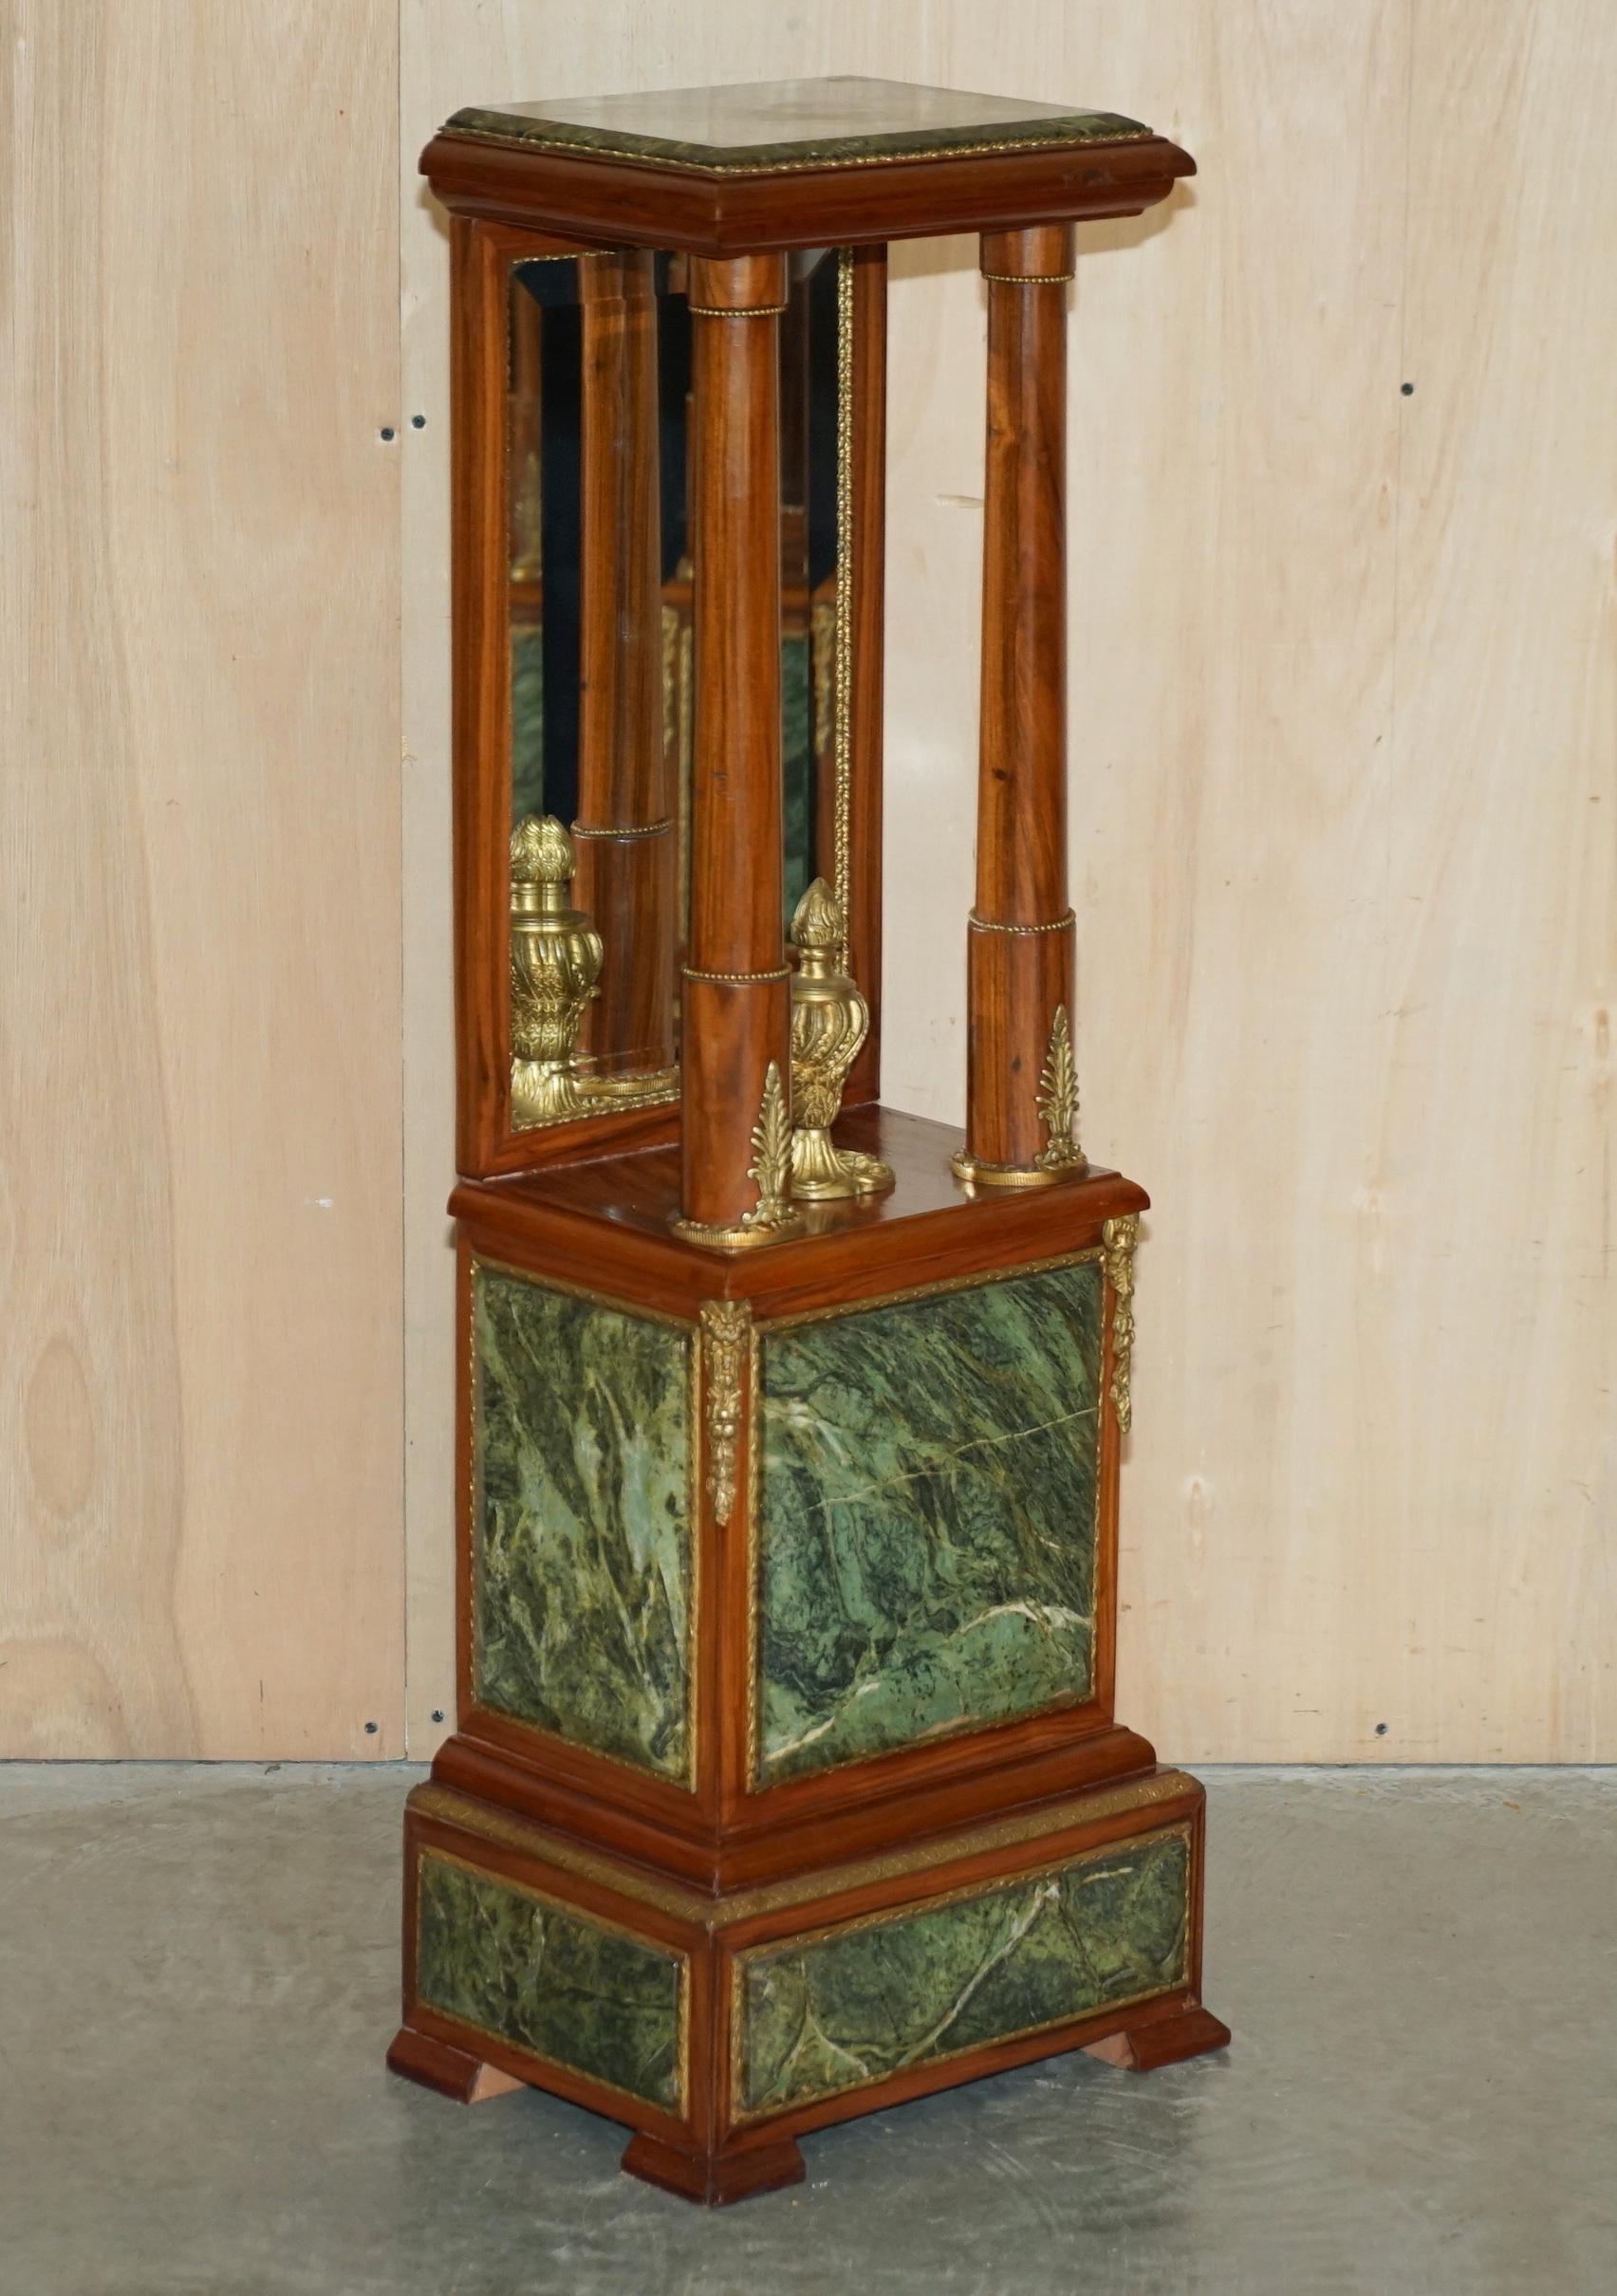 We are delighted to offer for sale this exquisite pair of Walnut, Gold Gilt Bronze mounted pedestals with Italian Green marble tops and mirrored backs circa 1920-1940

These are a highly decorative and well made pair of circa 1920-1940 pedestals.